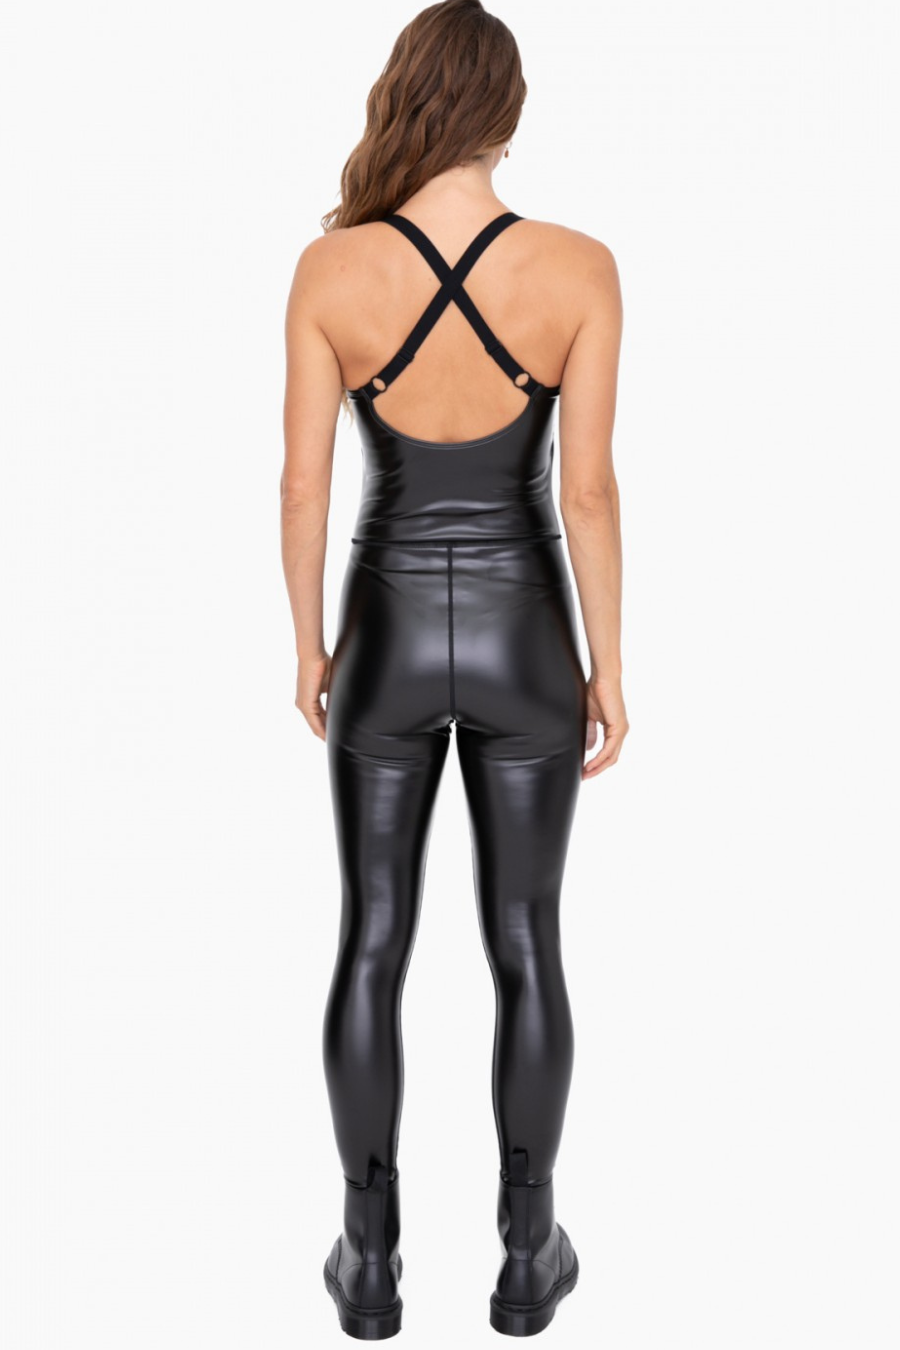 Faux Leather Catsuit with Adjustable Straps